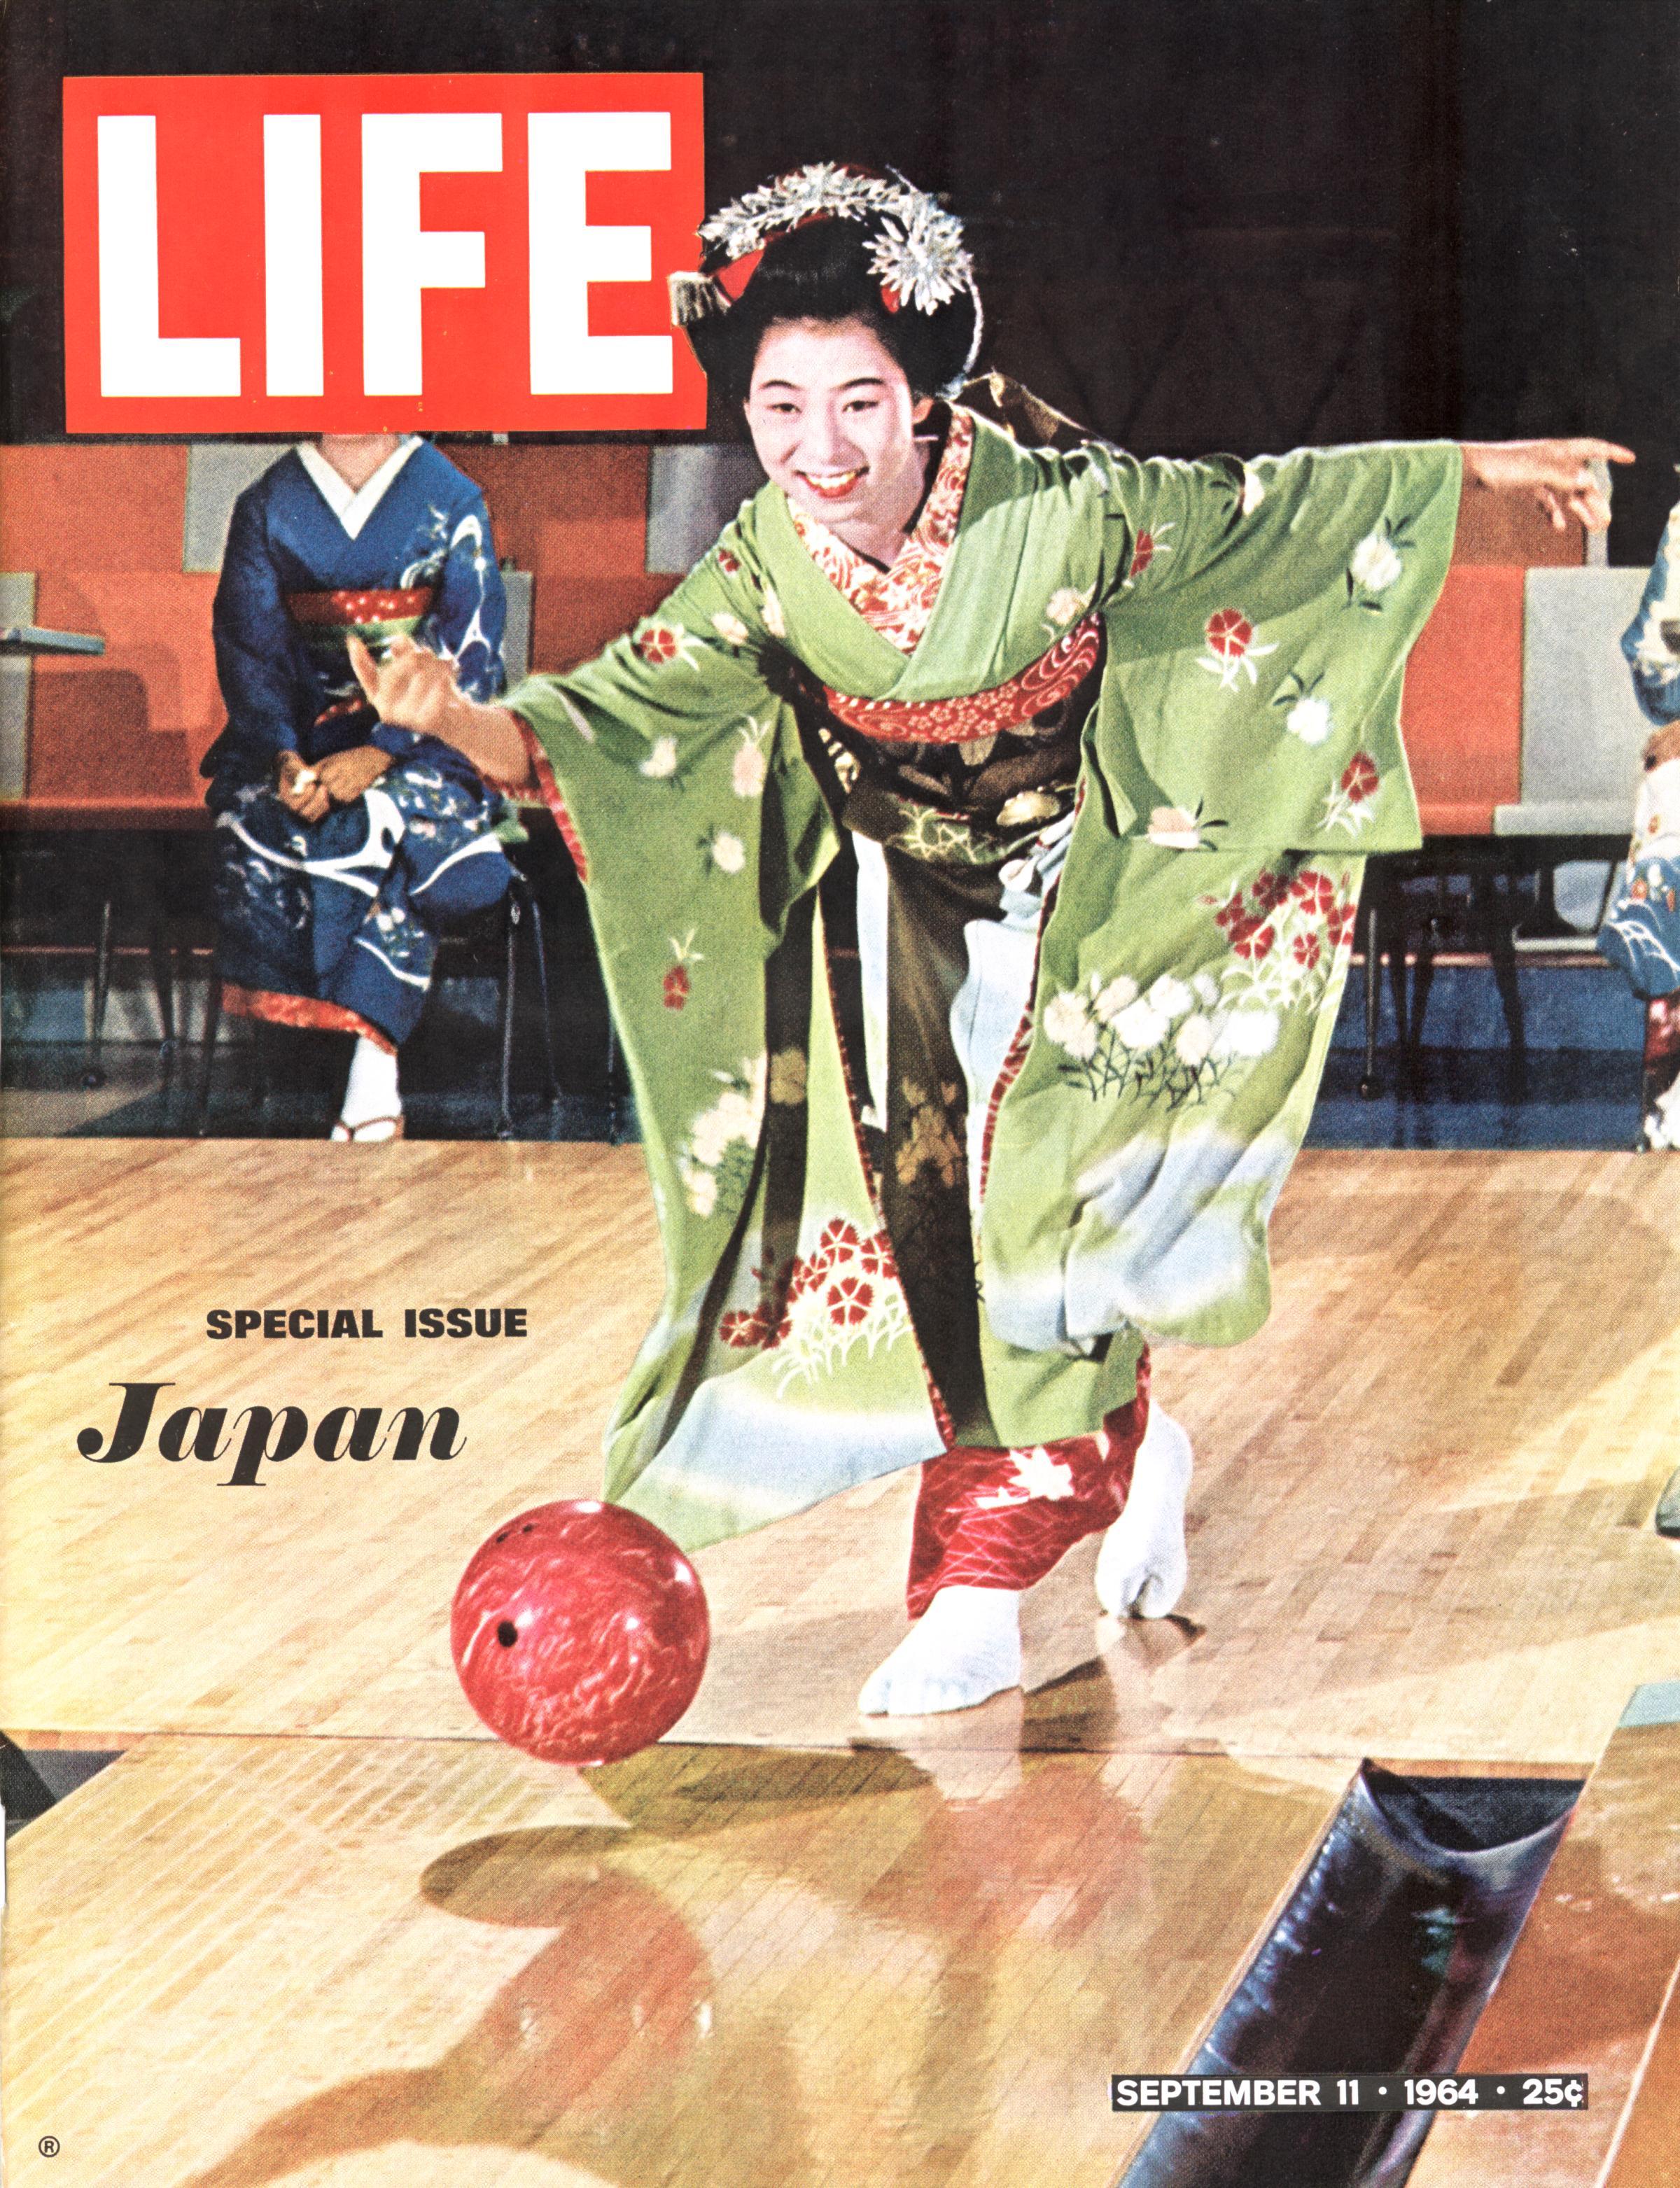 An apprentice geisha in a kimono and full make-up smiles as she bowls on a lane, watched by several other geisha in Kyoto, Japan.